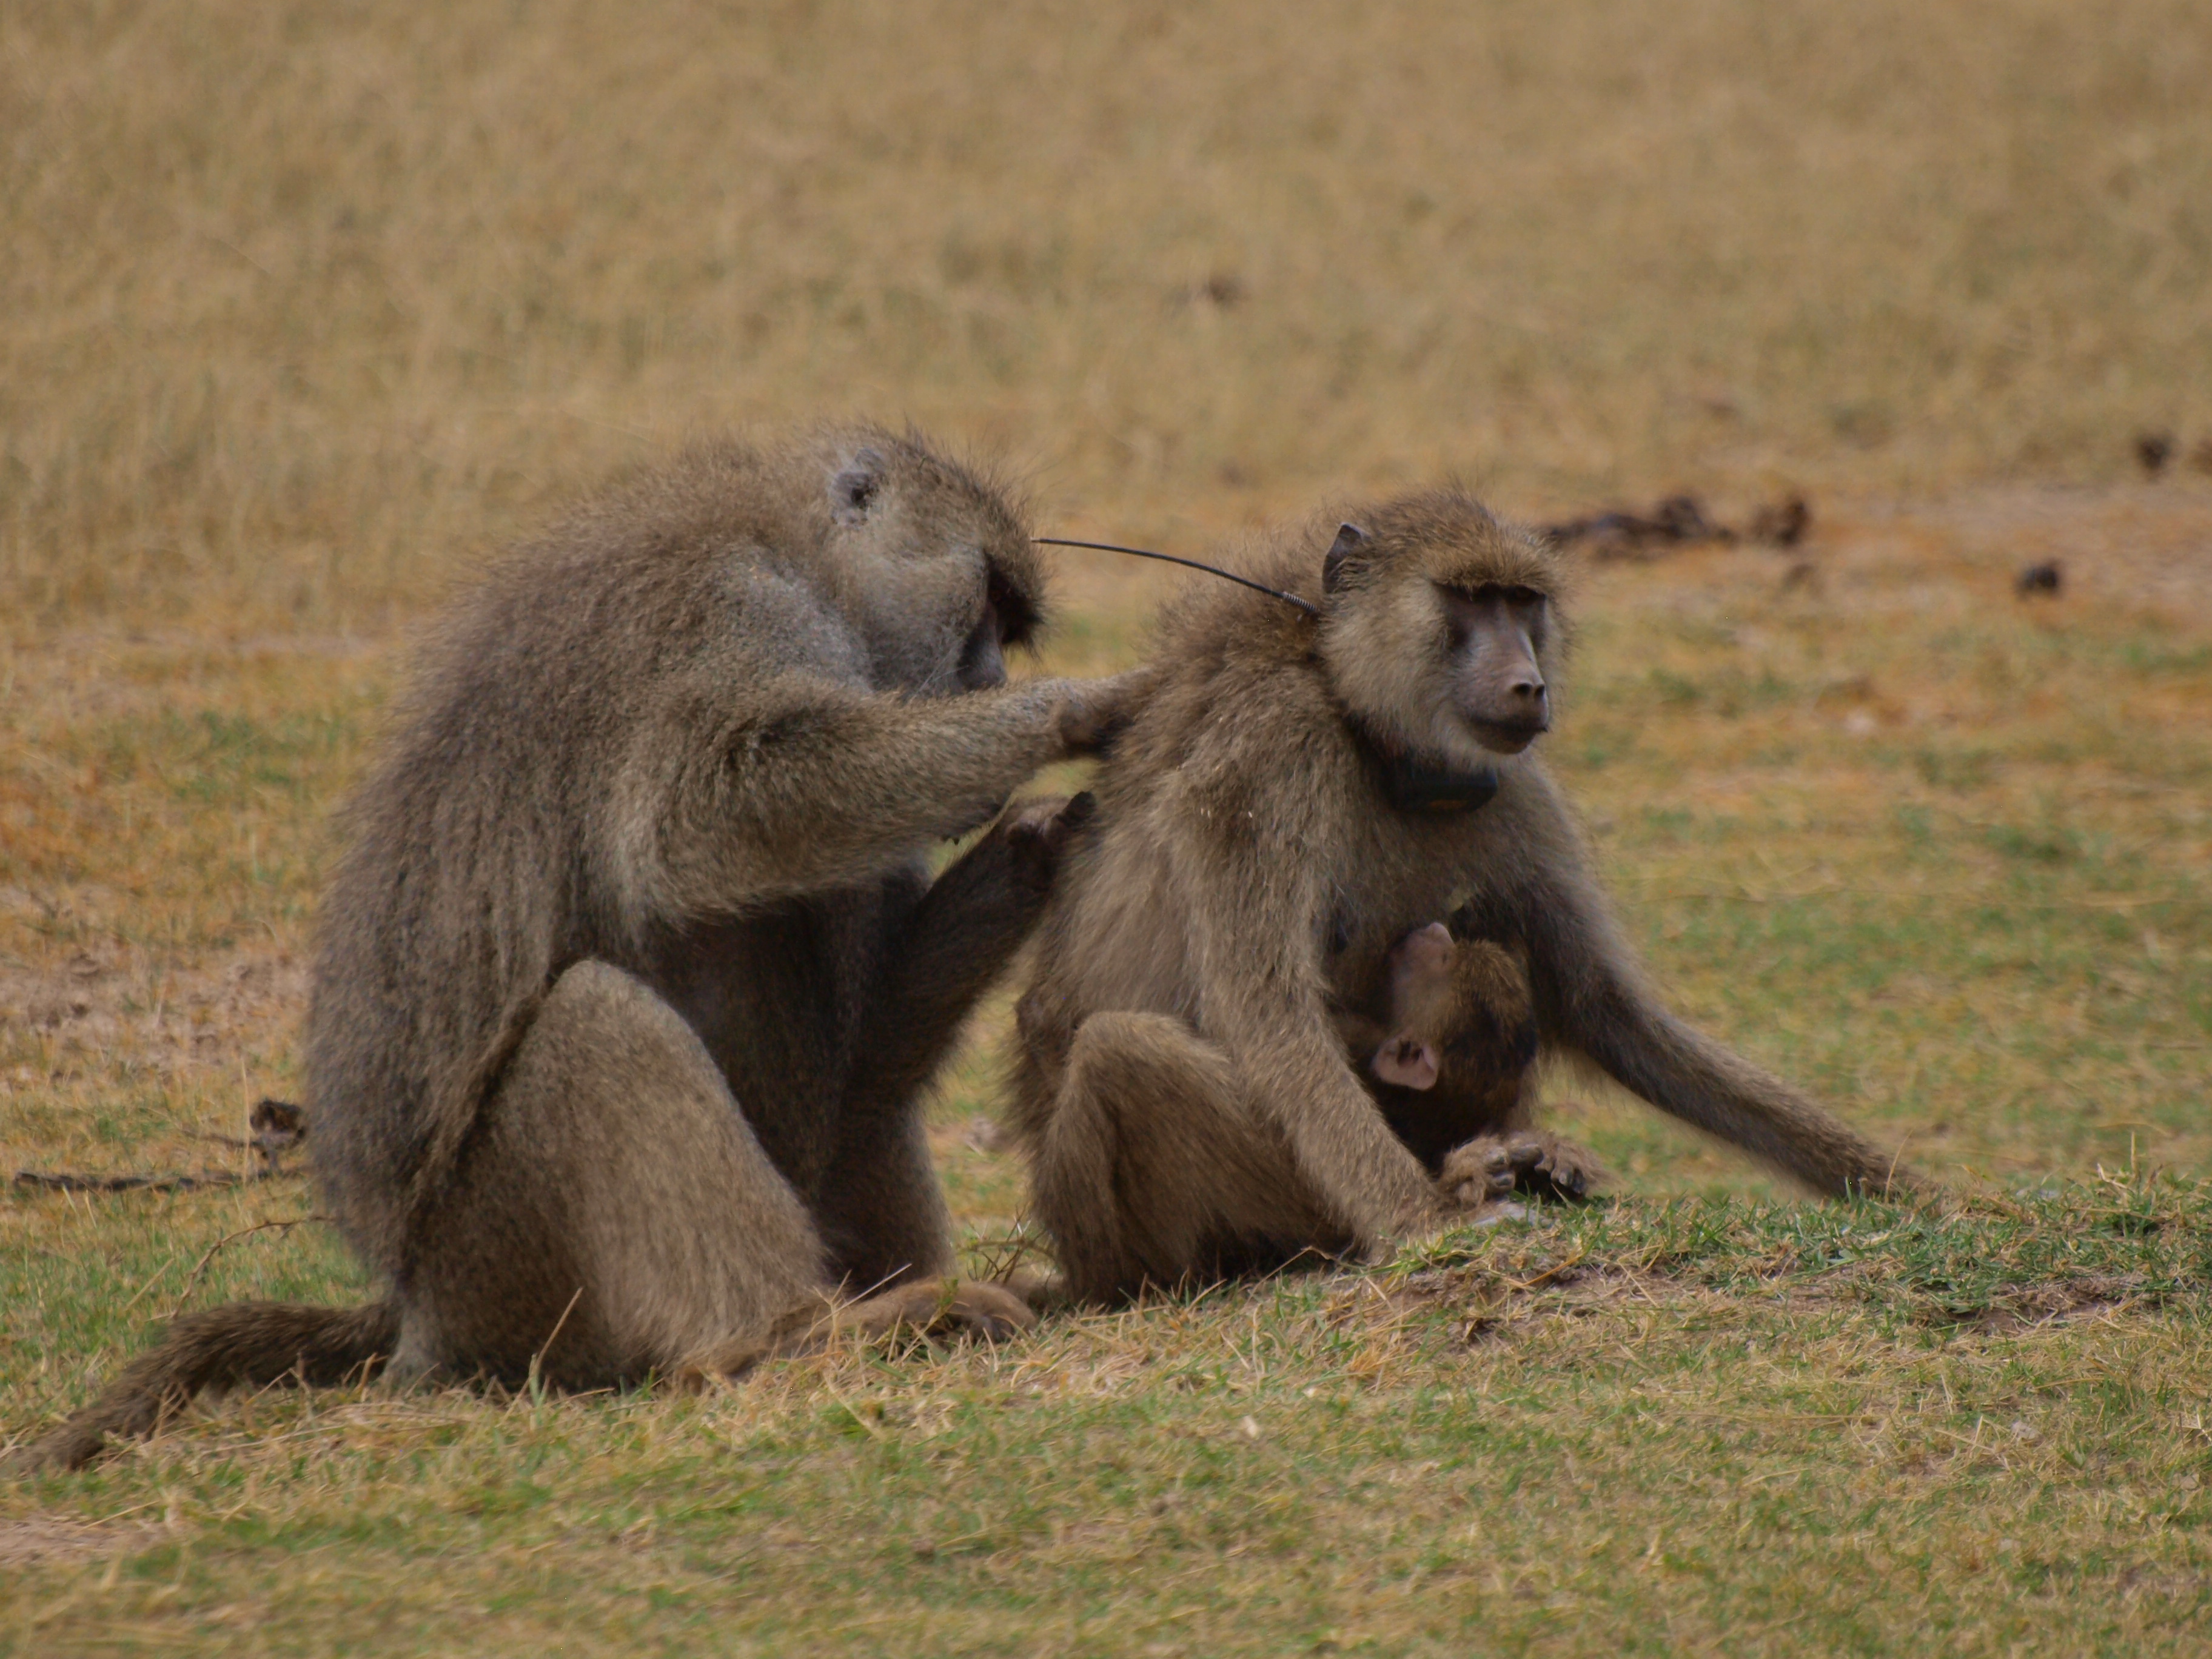 Socially structured gut microbiomes in wild baboons